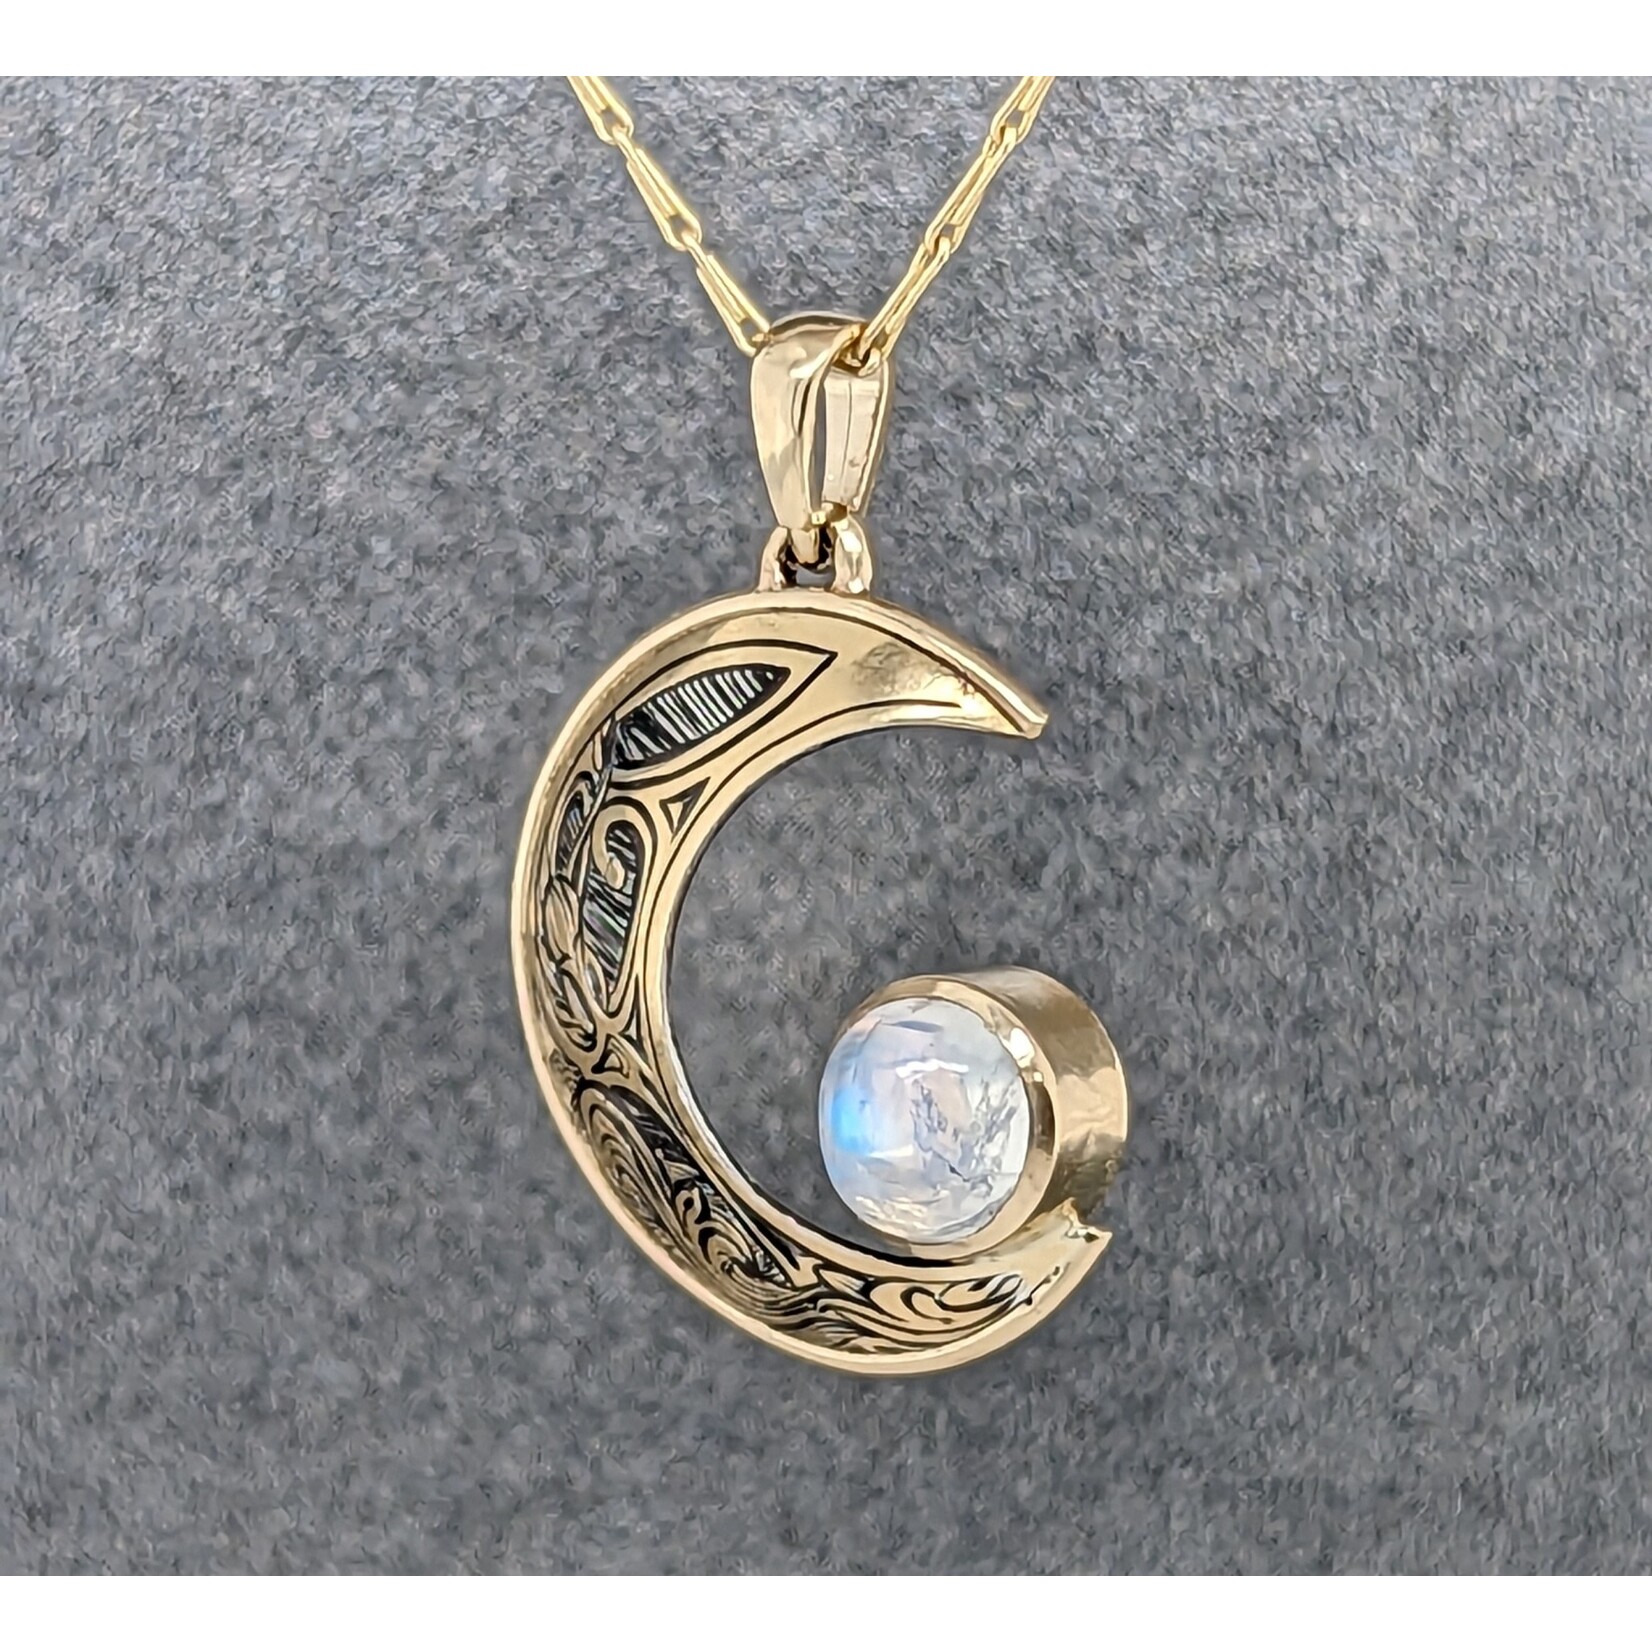 Modern Heirloom® 14KY Engraved Crescent Moon w/ 6mm Moonstone on 14KY 18" Pinsetta 1.0mm